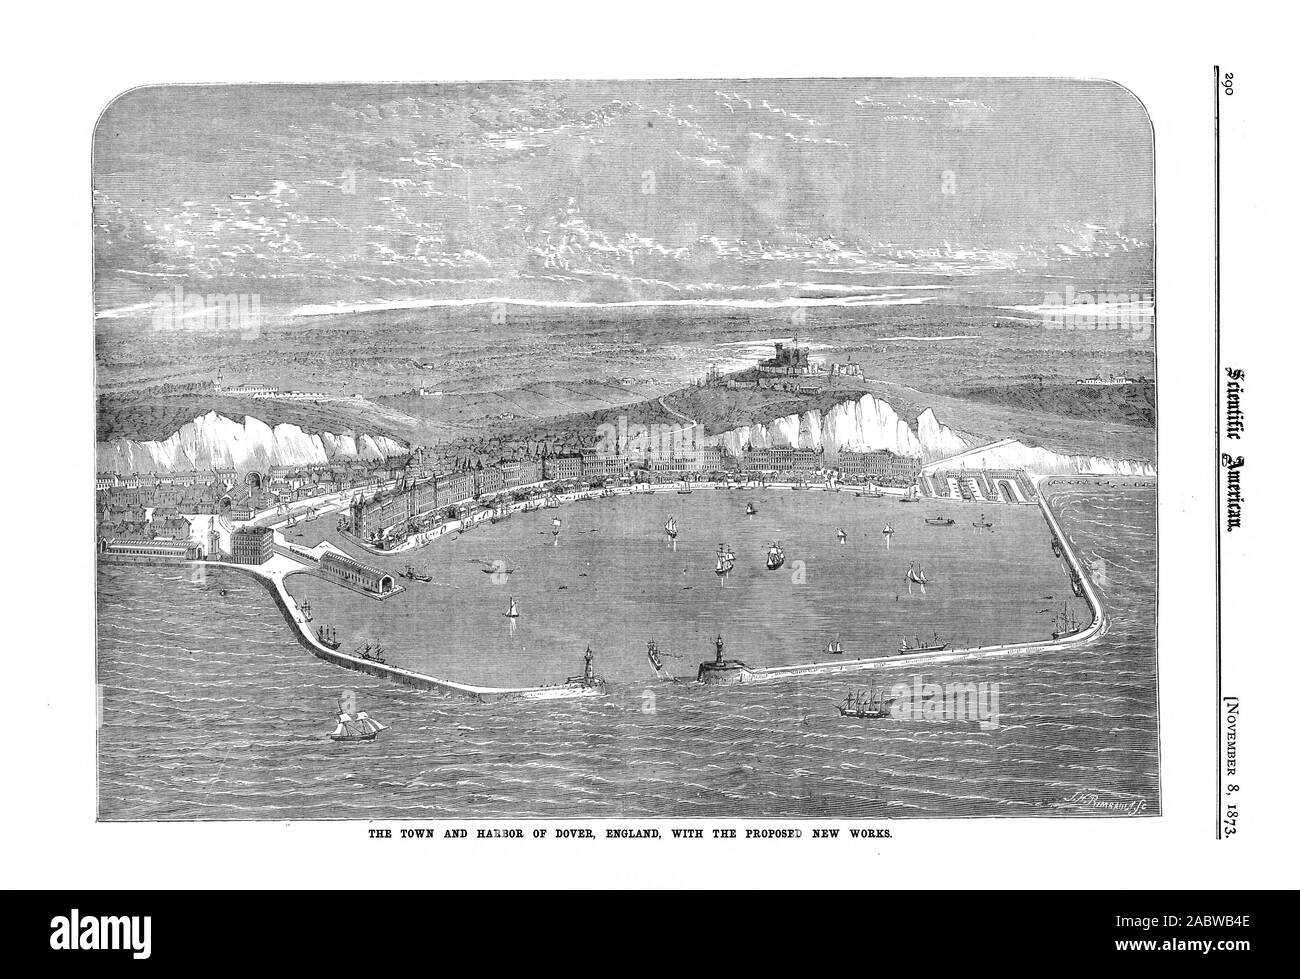 THE TOWN AND HARBOR OF DOVER ENGLAND WITH THE PROPOSED NEW WORKS., scientific american, 1873-11-08 Stock Photo